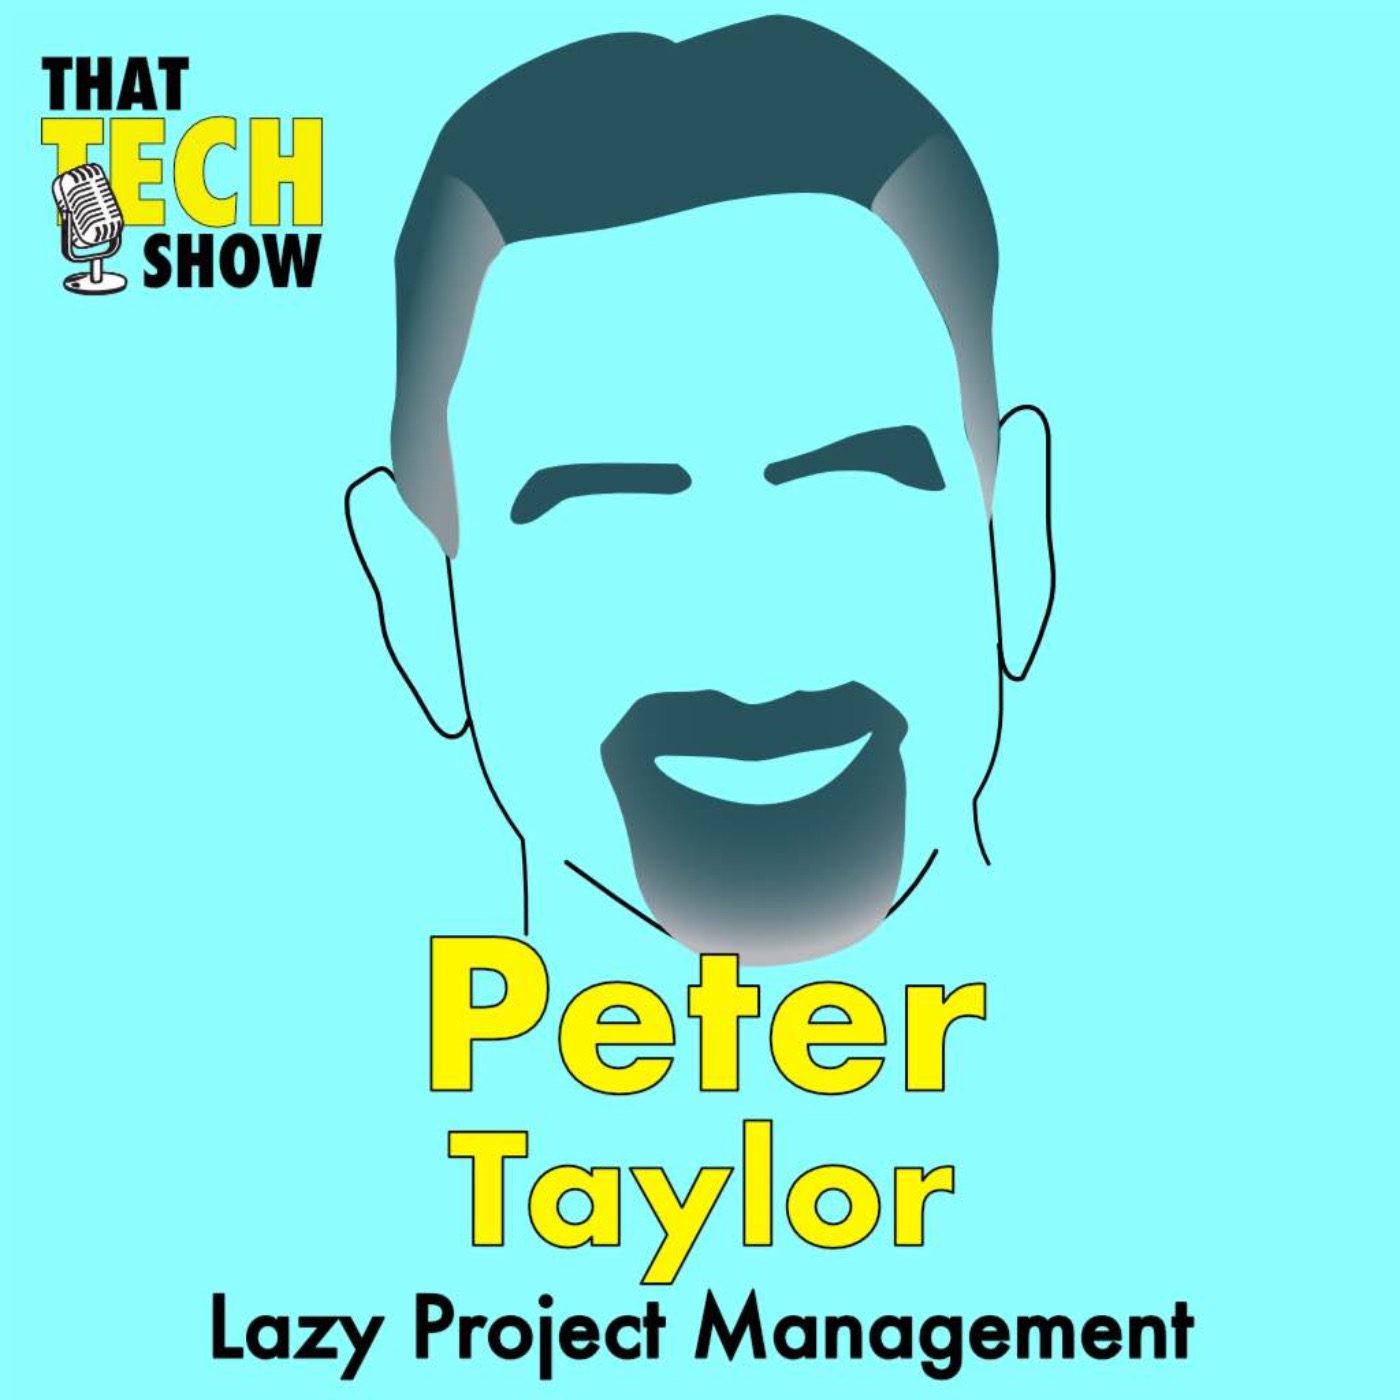 Episode 18 - The Lazy Project Manager, Peter Taylor